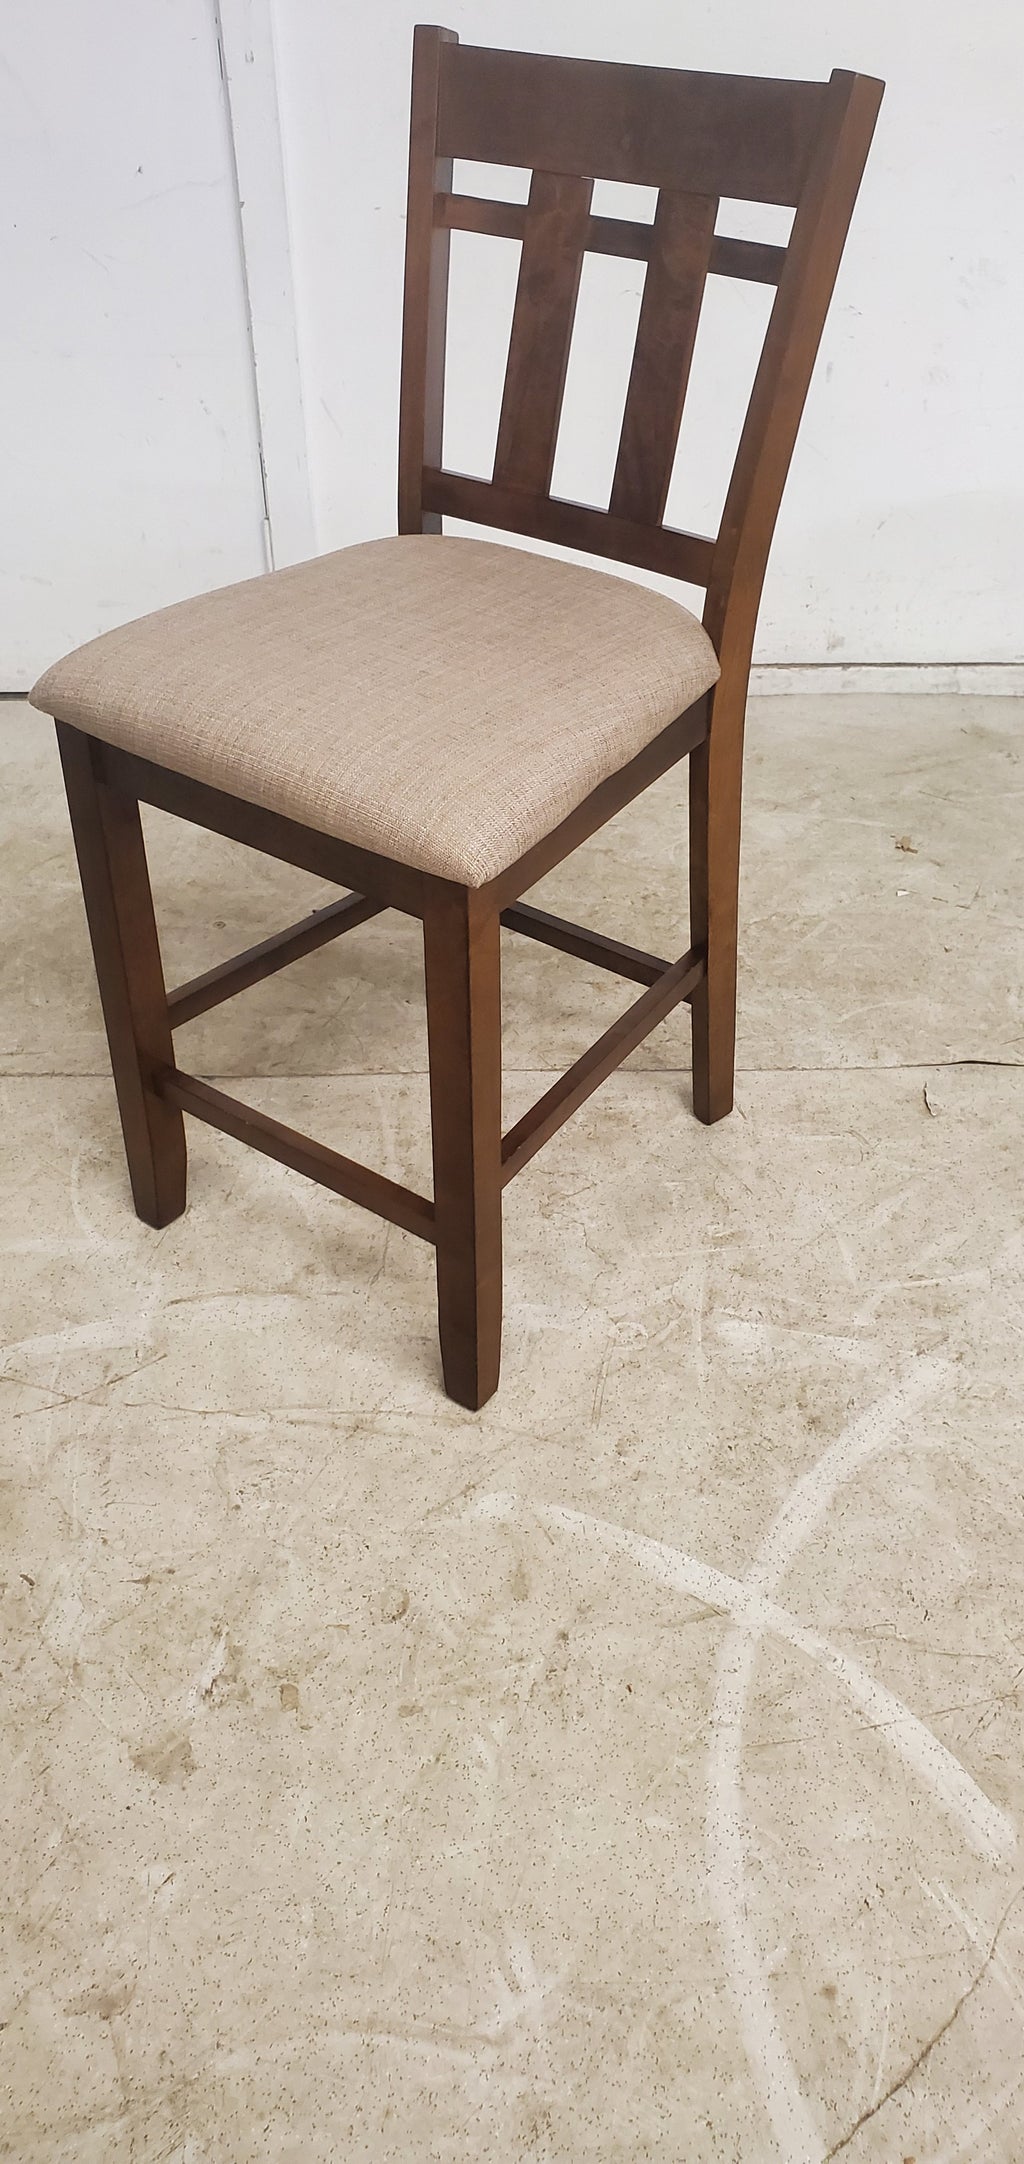 42''H Upholstered Wood Chair